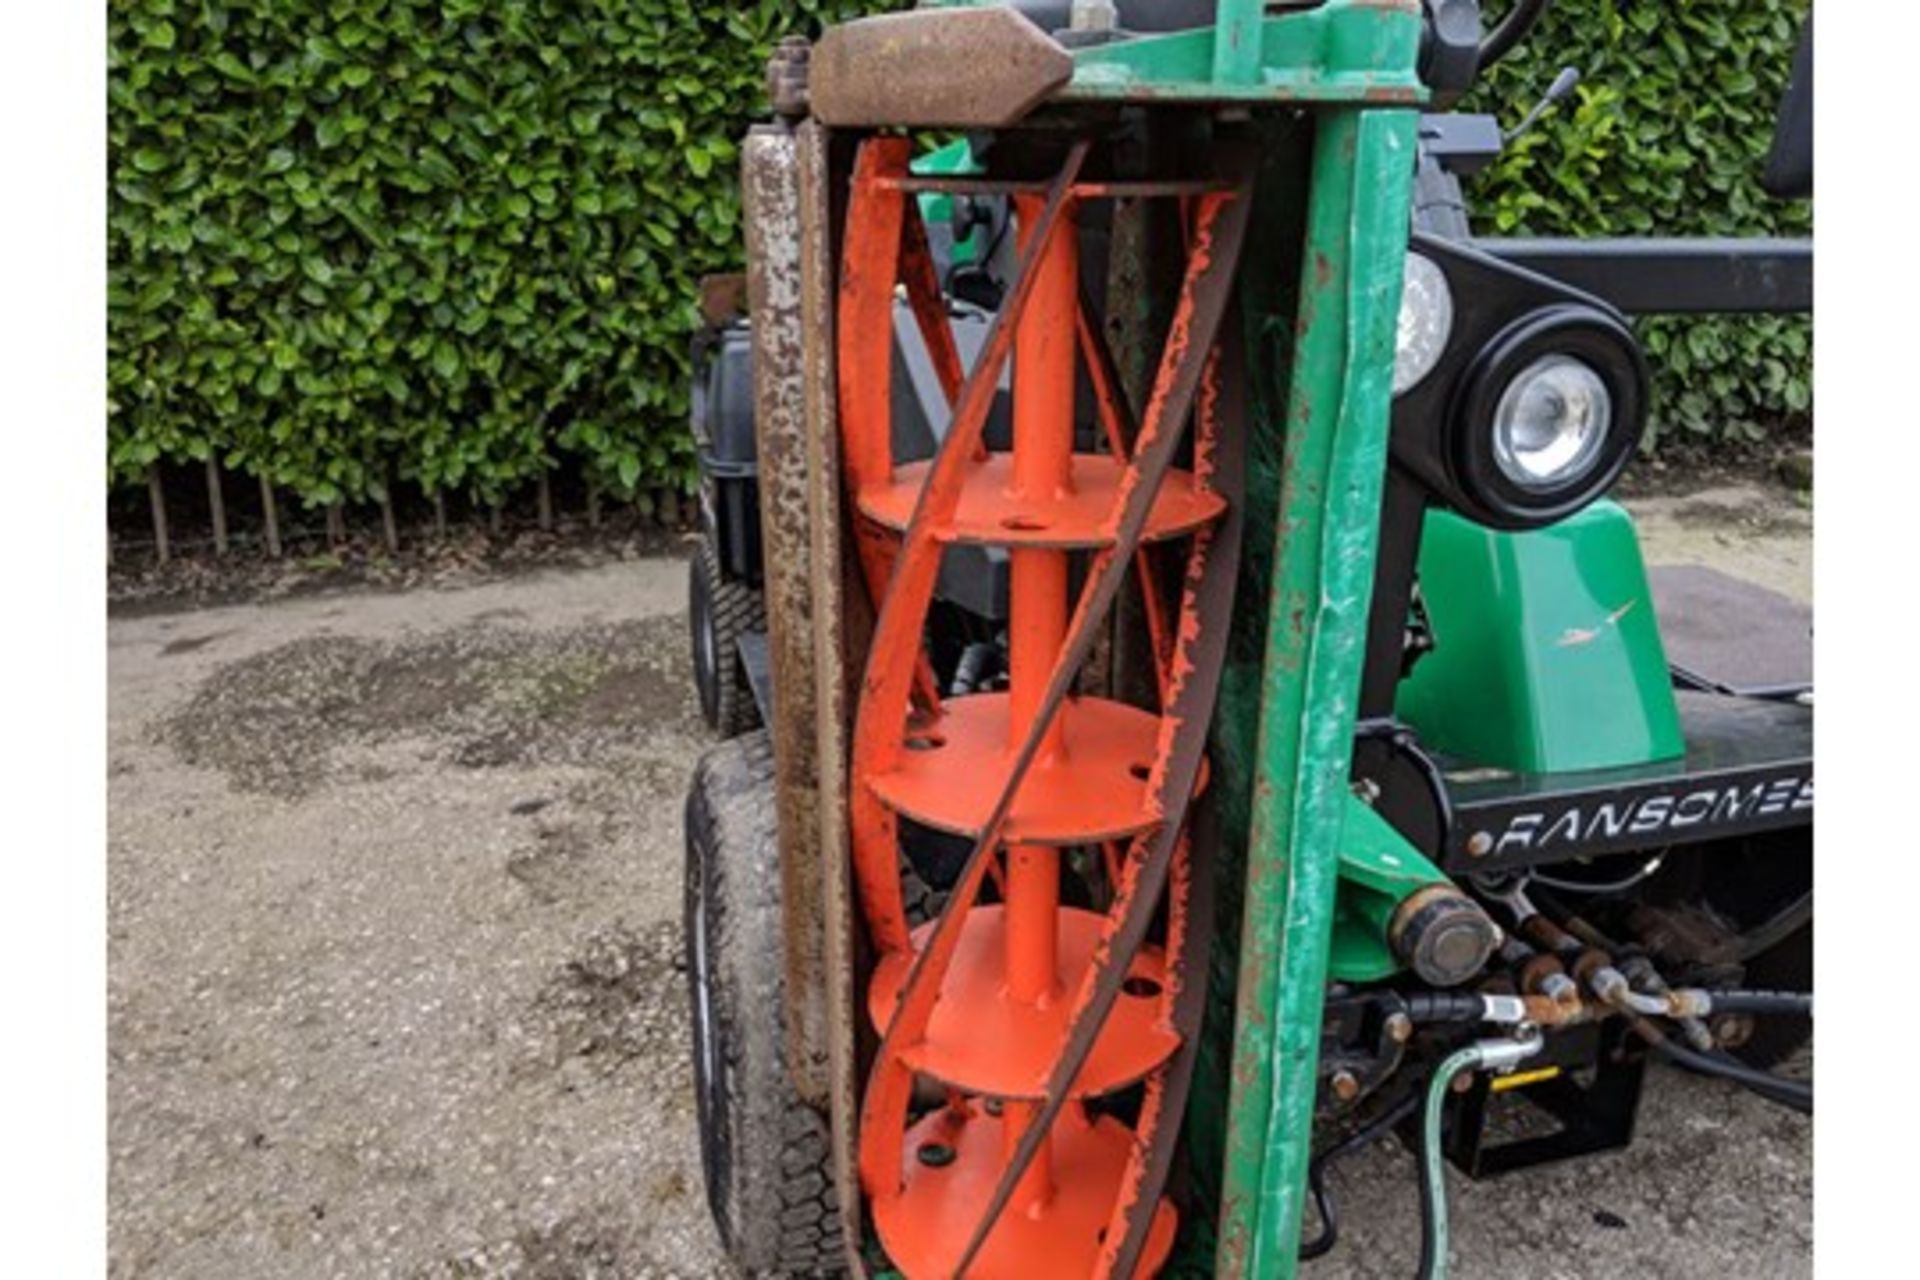 2012 Ransomes Parkway 3 4WD Triple Cylinder Mower - Image 8 of 8